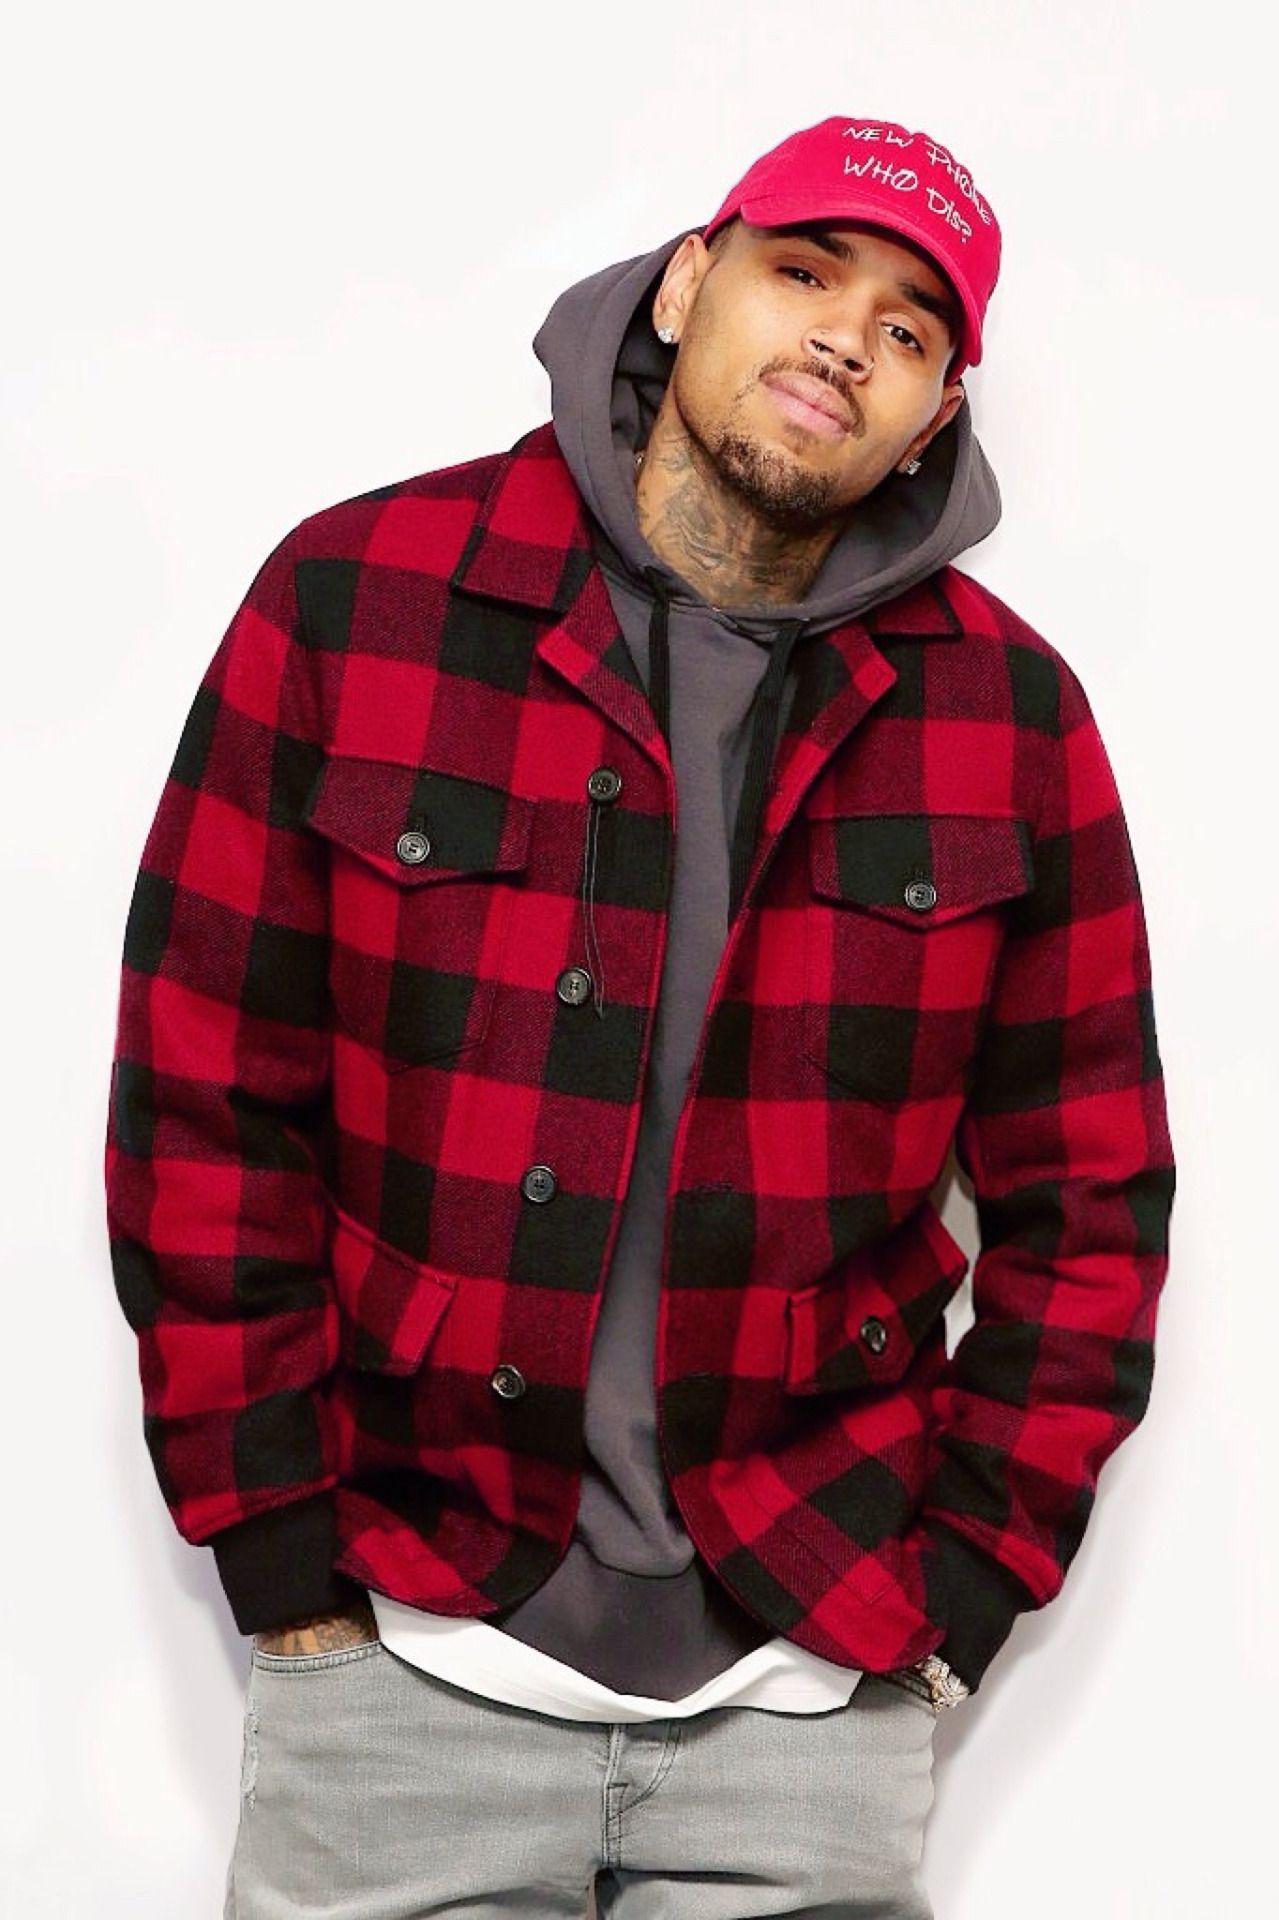 Chris Brown forced to cancel upcoming Australian tour. Chris d